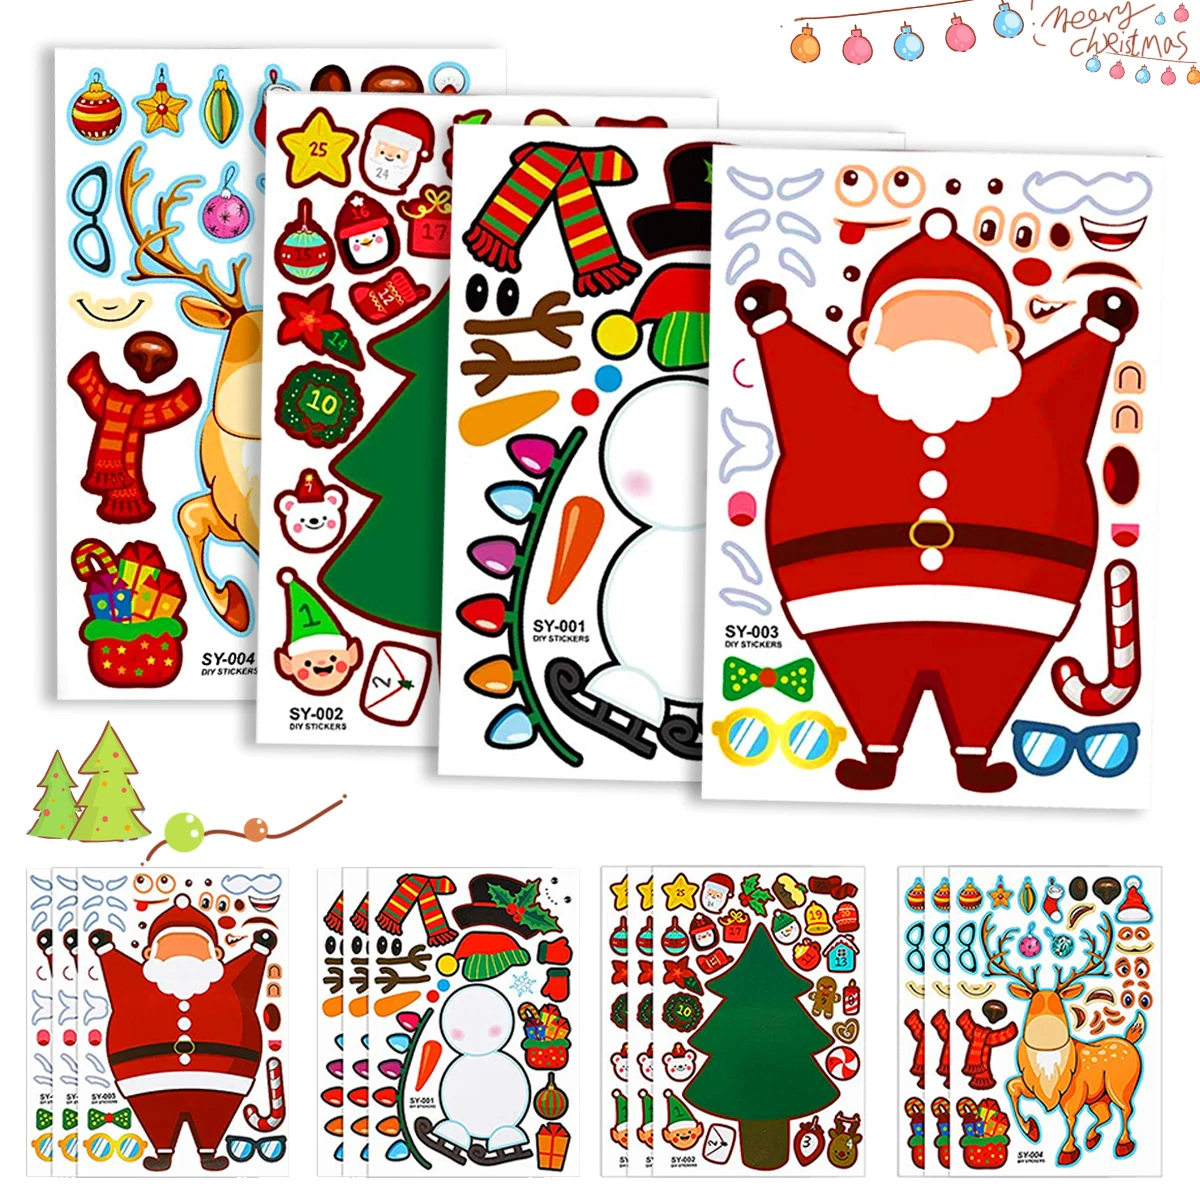 

25 Sheets Christmas Make a Face Stickers Make Your Own Santa Claus Elk Snowman Decal for Toddlers DIY Crafts Xmas Party Favors